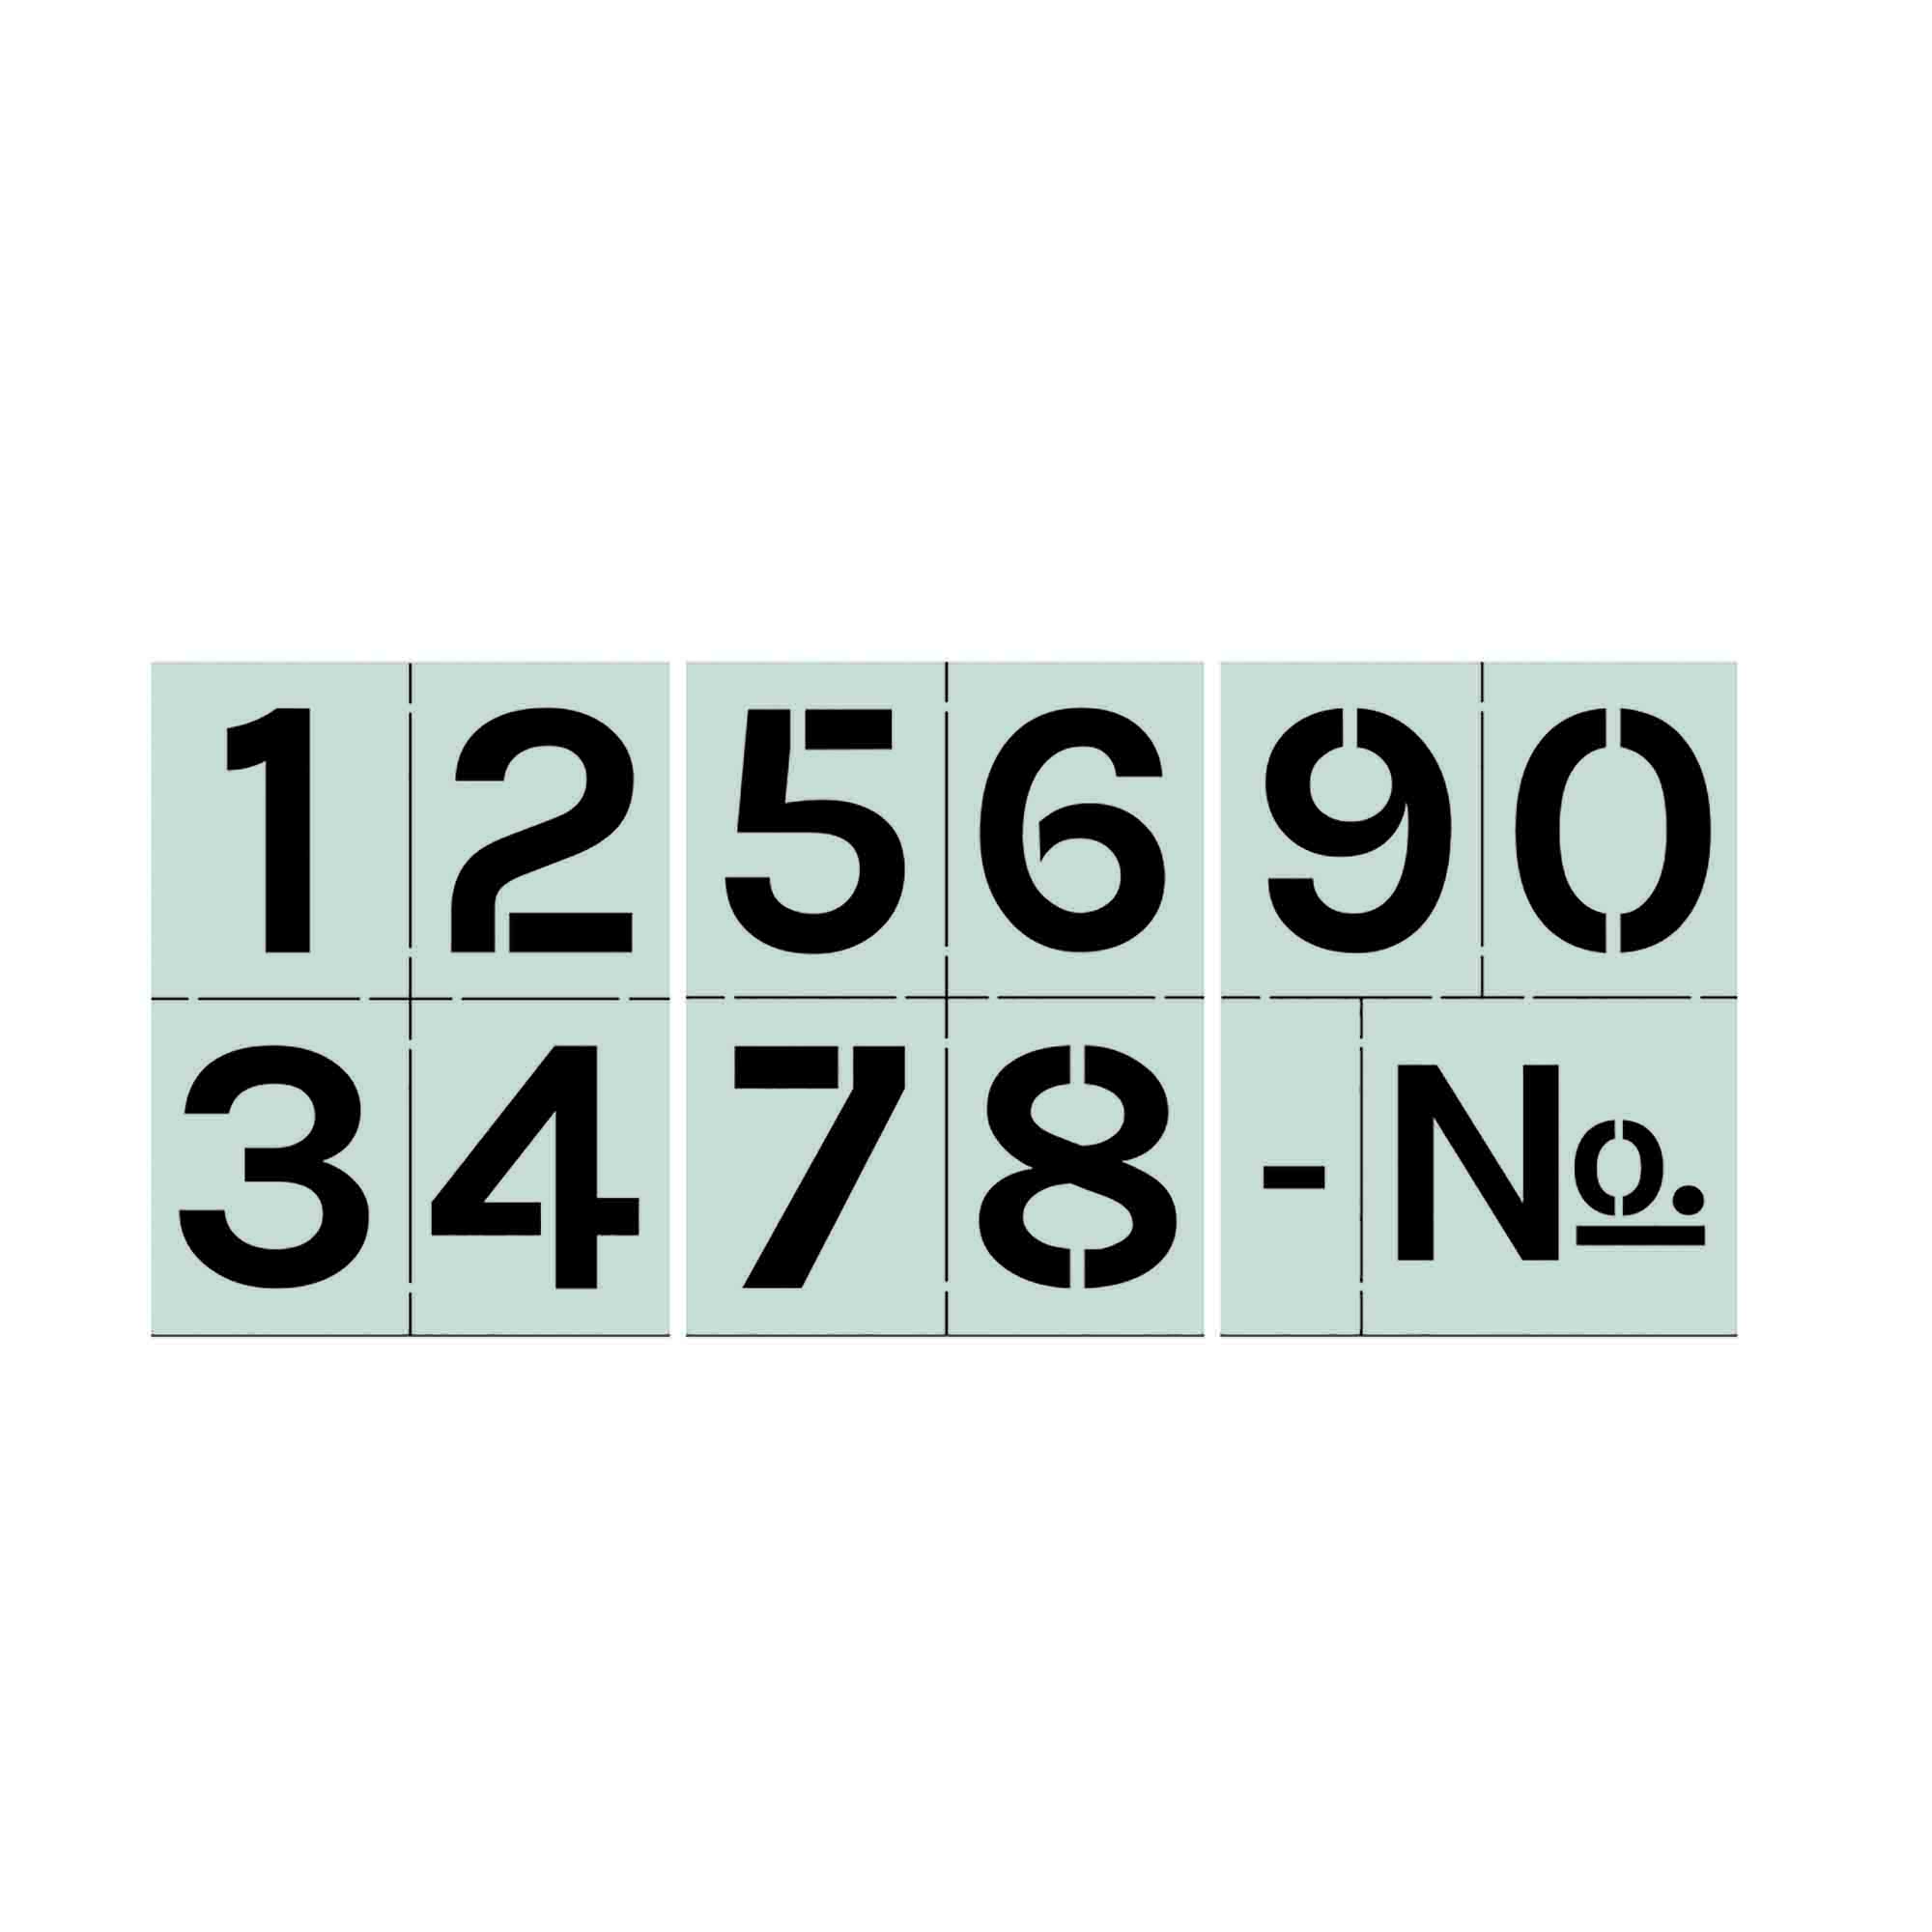 Printable Stencils for the Number 8  Number stencils, Stencils printables,  Stencil printing